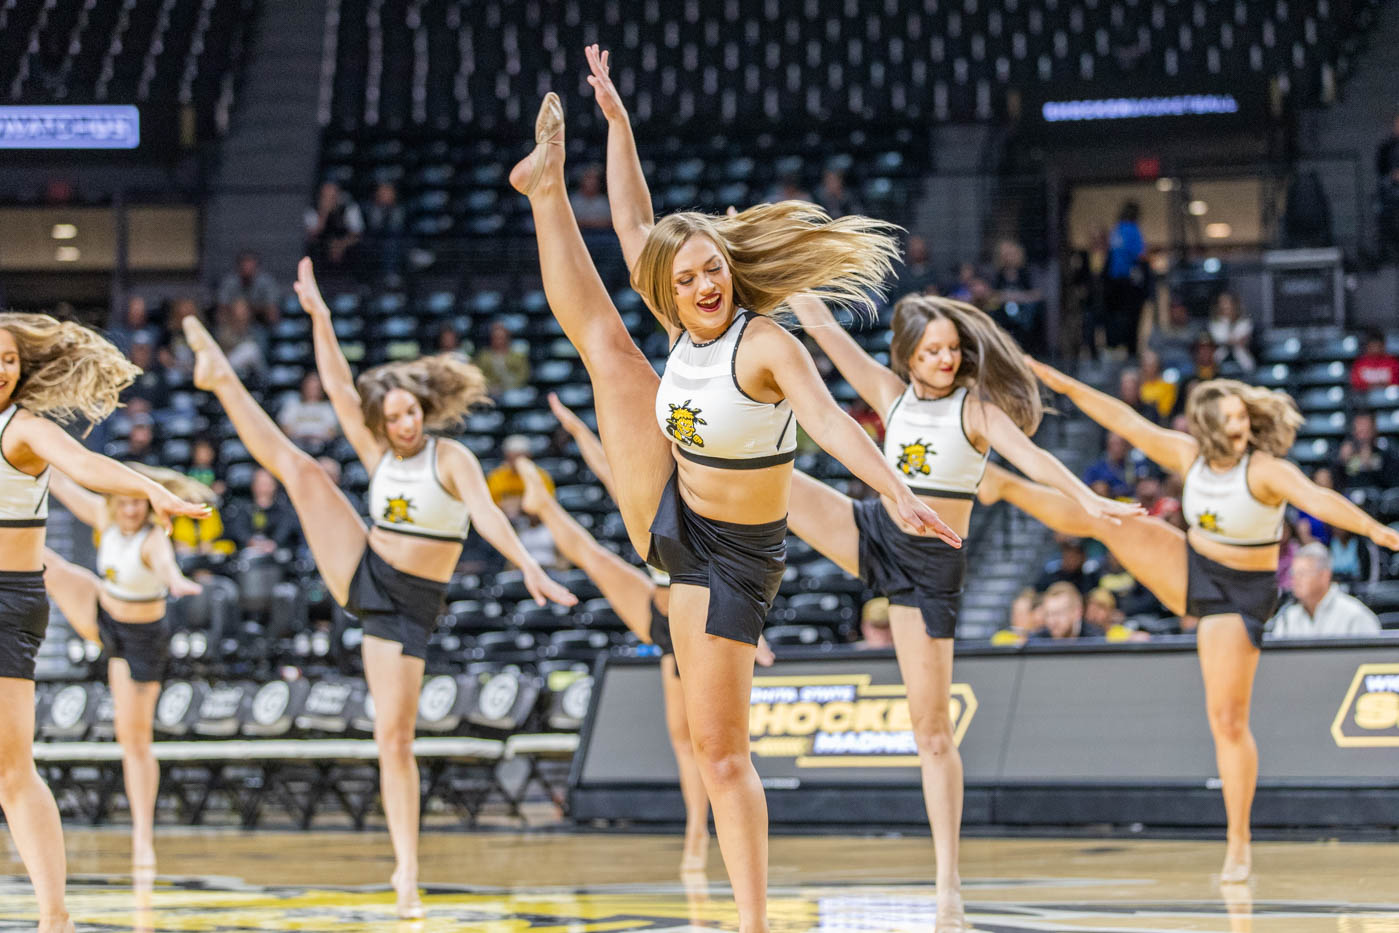 Wichita State dancers do turns and kicks during their Shocker Madness routine in Charles Koch Arena.